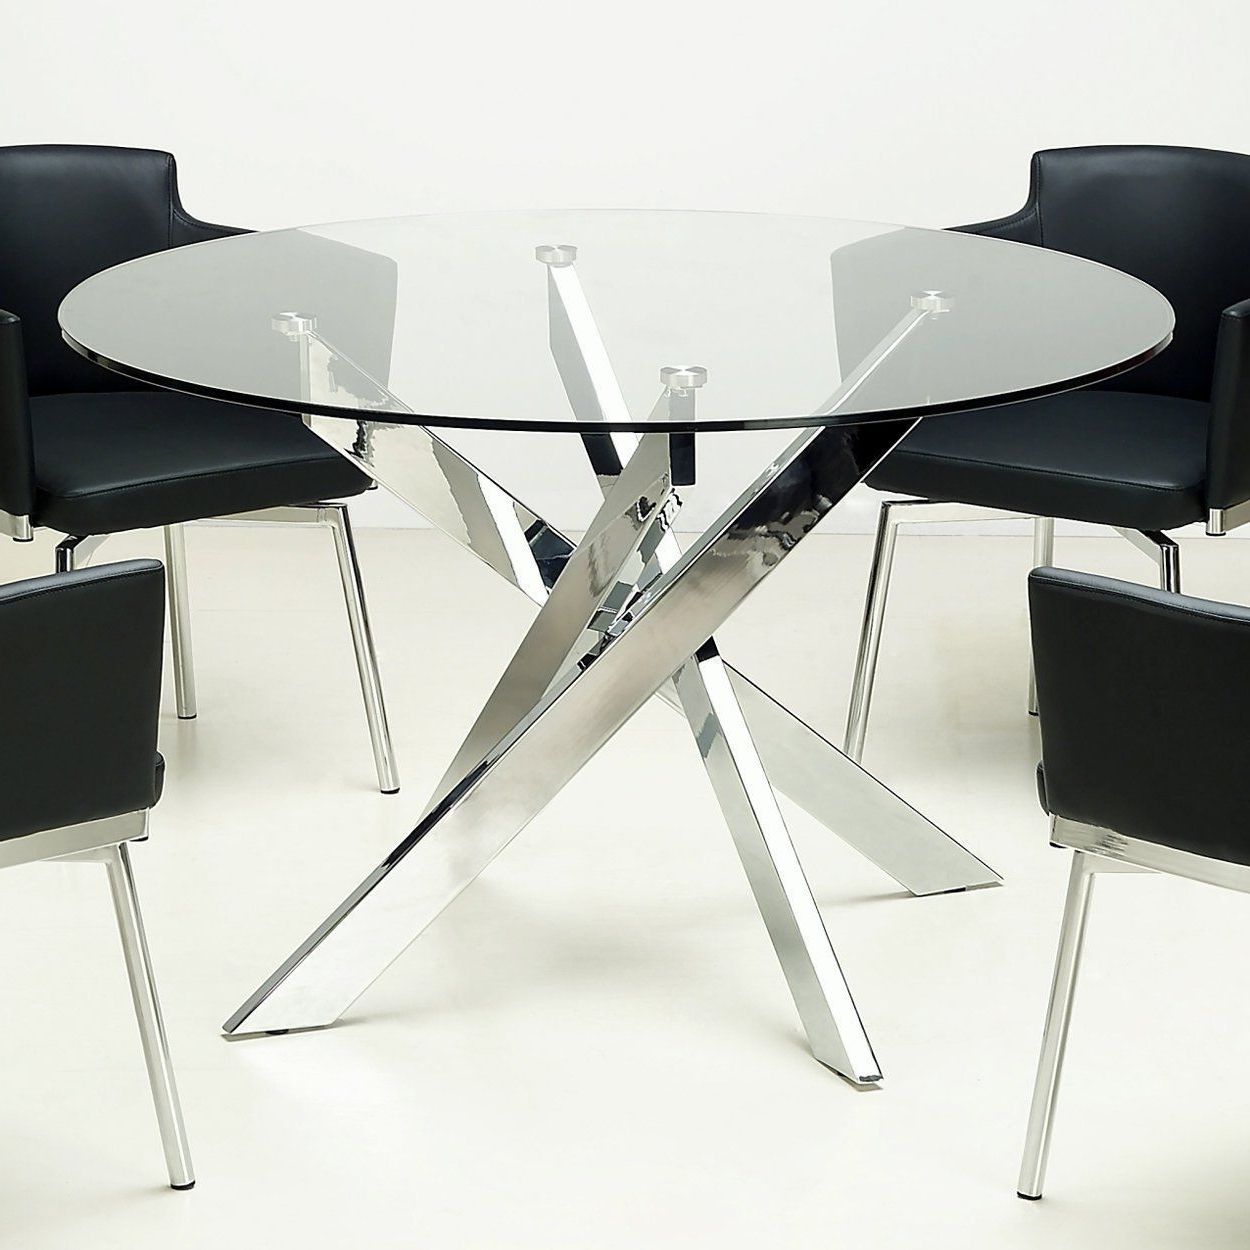 Preferred Eames Style Dining Tables With Chromed Leg And Tempered Glass Top In Online Shopping – Bedding, Furniture, Electronics, Jewelry (View 3 of 25)